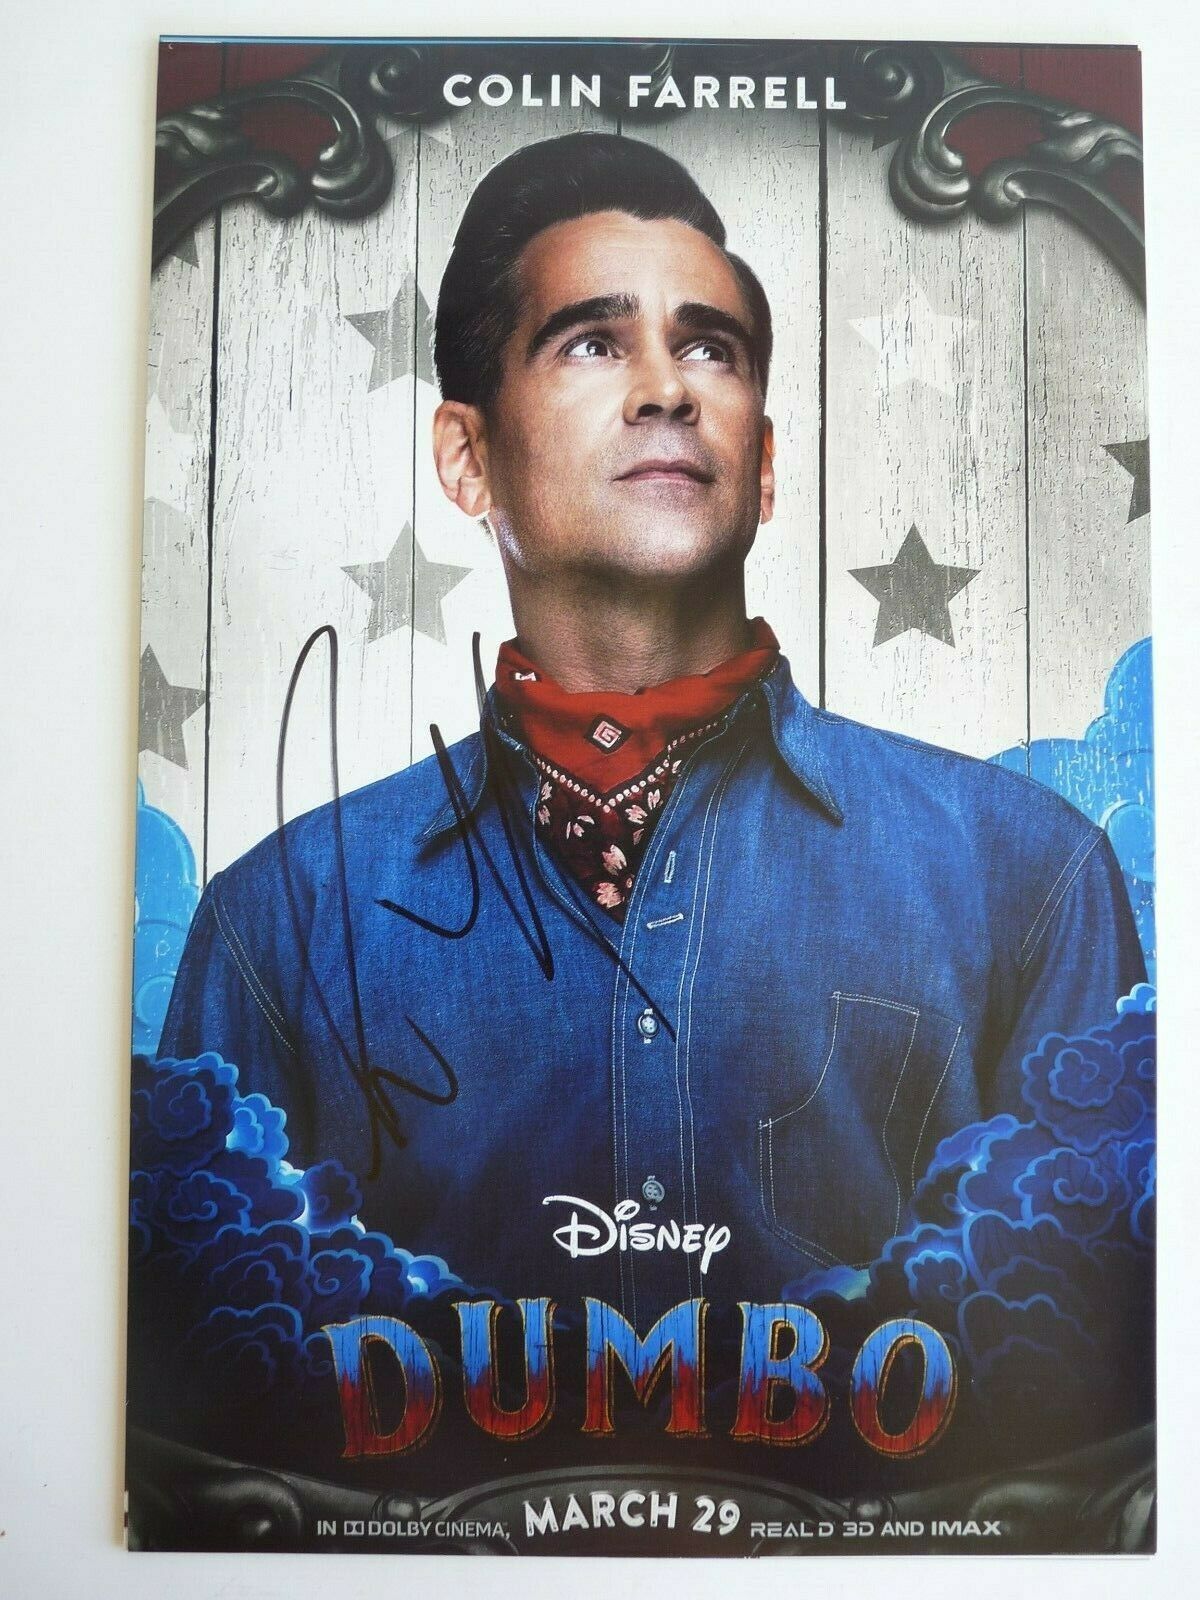 COLIN FARRELL SIGNED AUTOGRAPH DUMBO 12×18 MOVIE PHOTO BECKETT BAS CERTIFIED G COLLECTIBLE MEMORABILIA